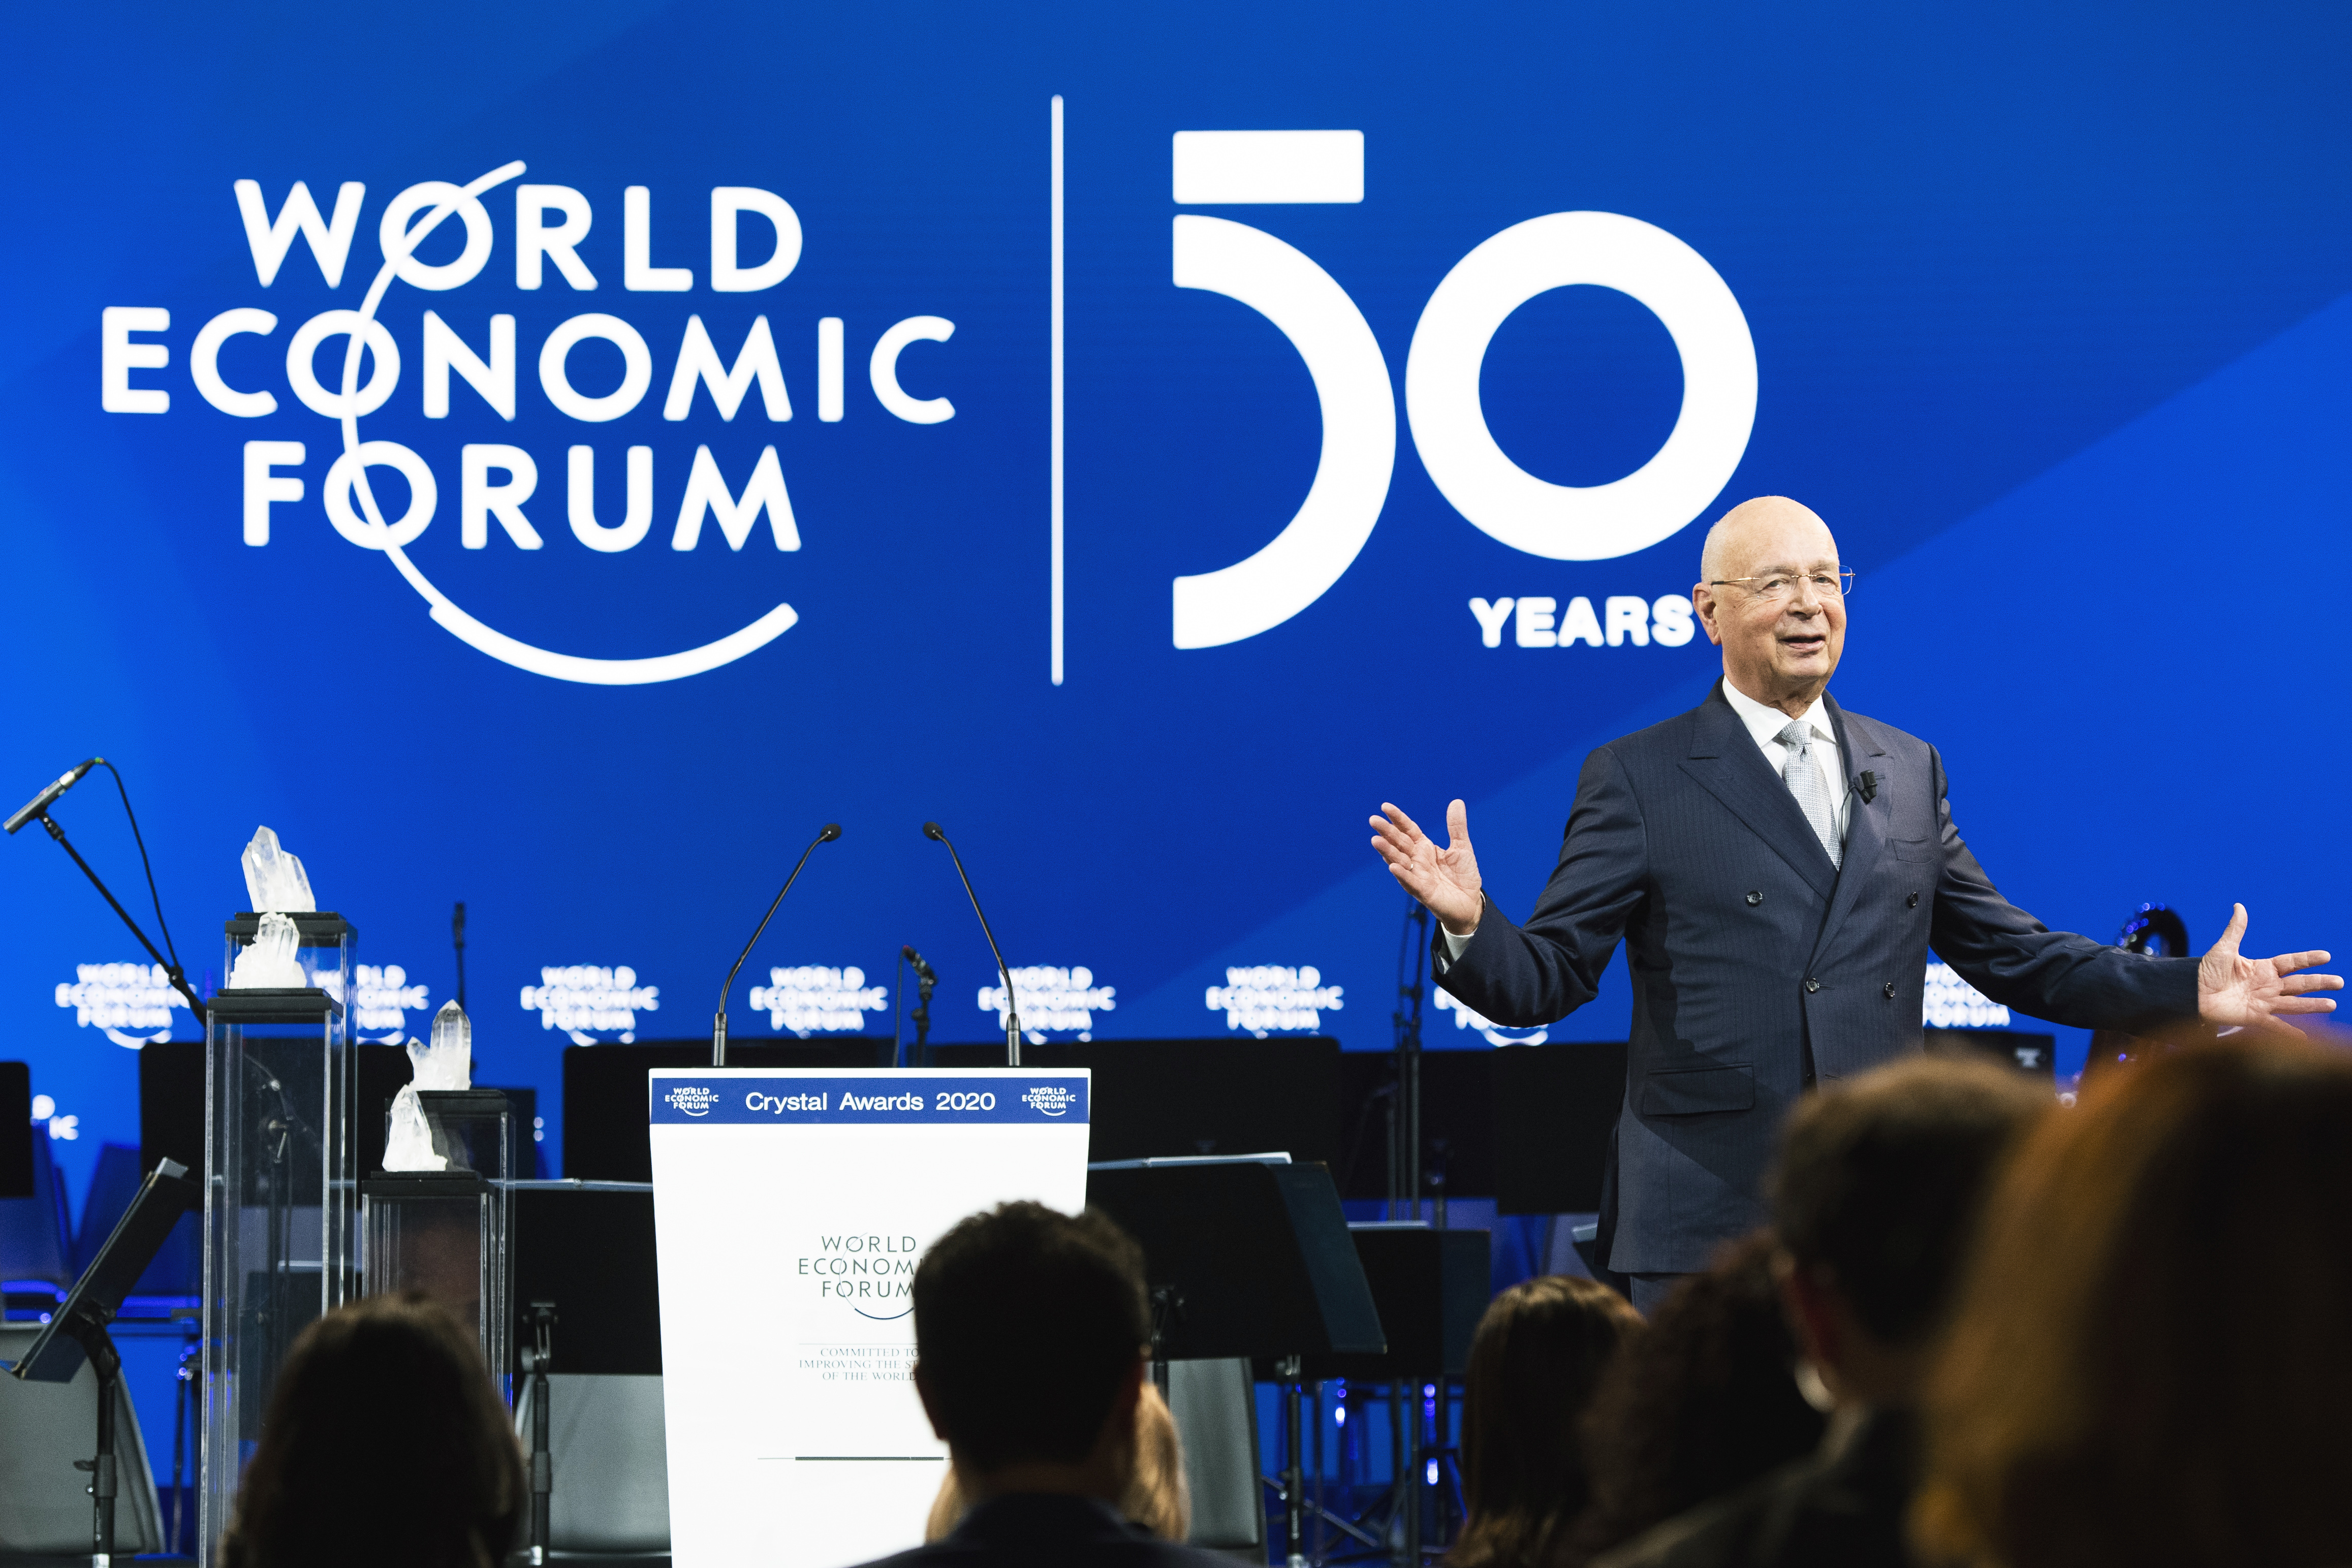 Founder and Executive Chairman of the World Economic Forum Klaus Schwab delivers a welcoming address, prior to the start of the 50th annual meeting of the World Economic Forum, in Davos, Switzerland, Monday, Jan. 20, 2020. The meeting will run from Jan. 21 to 24. (Gian Ehrenzeller/Keystone via AP)